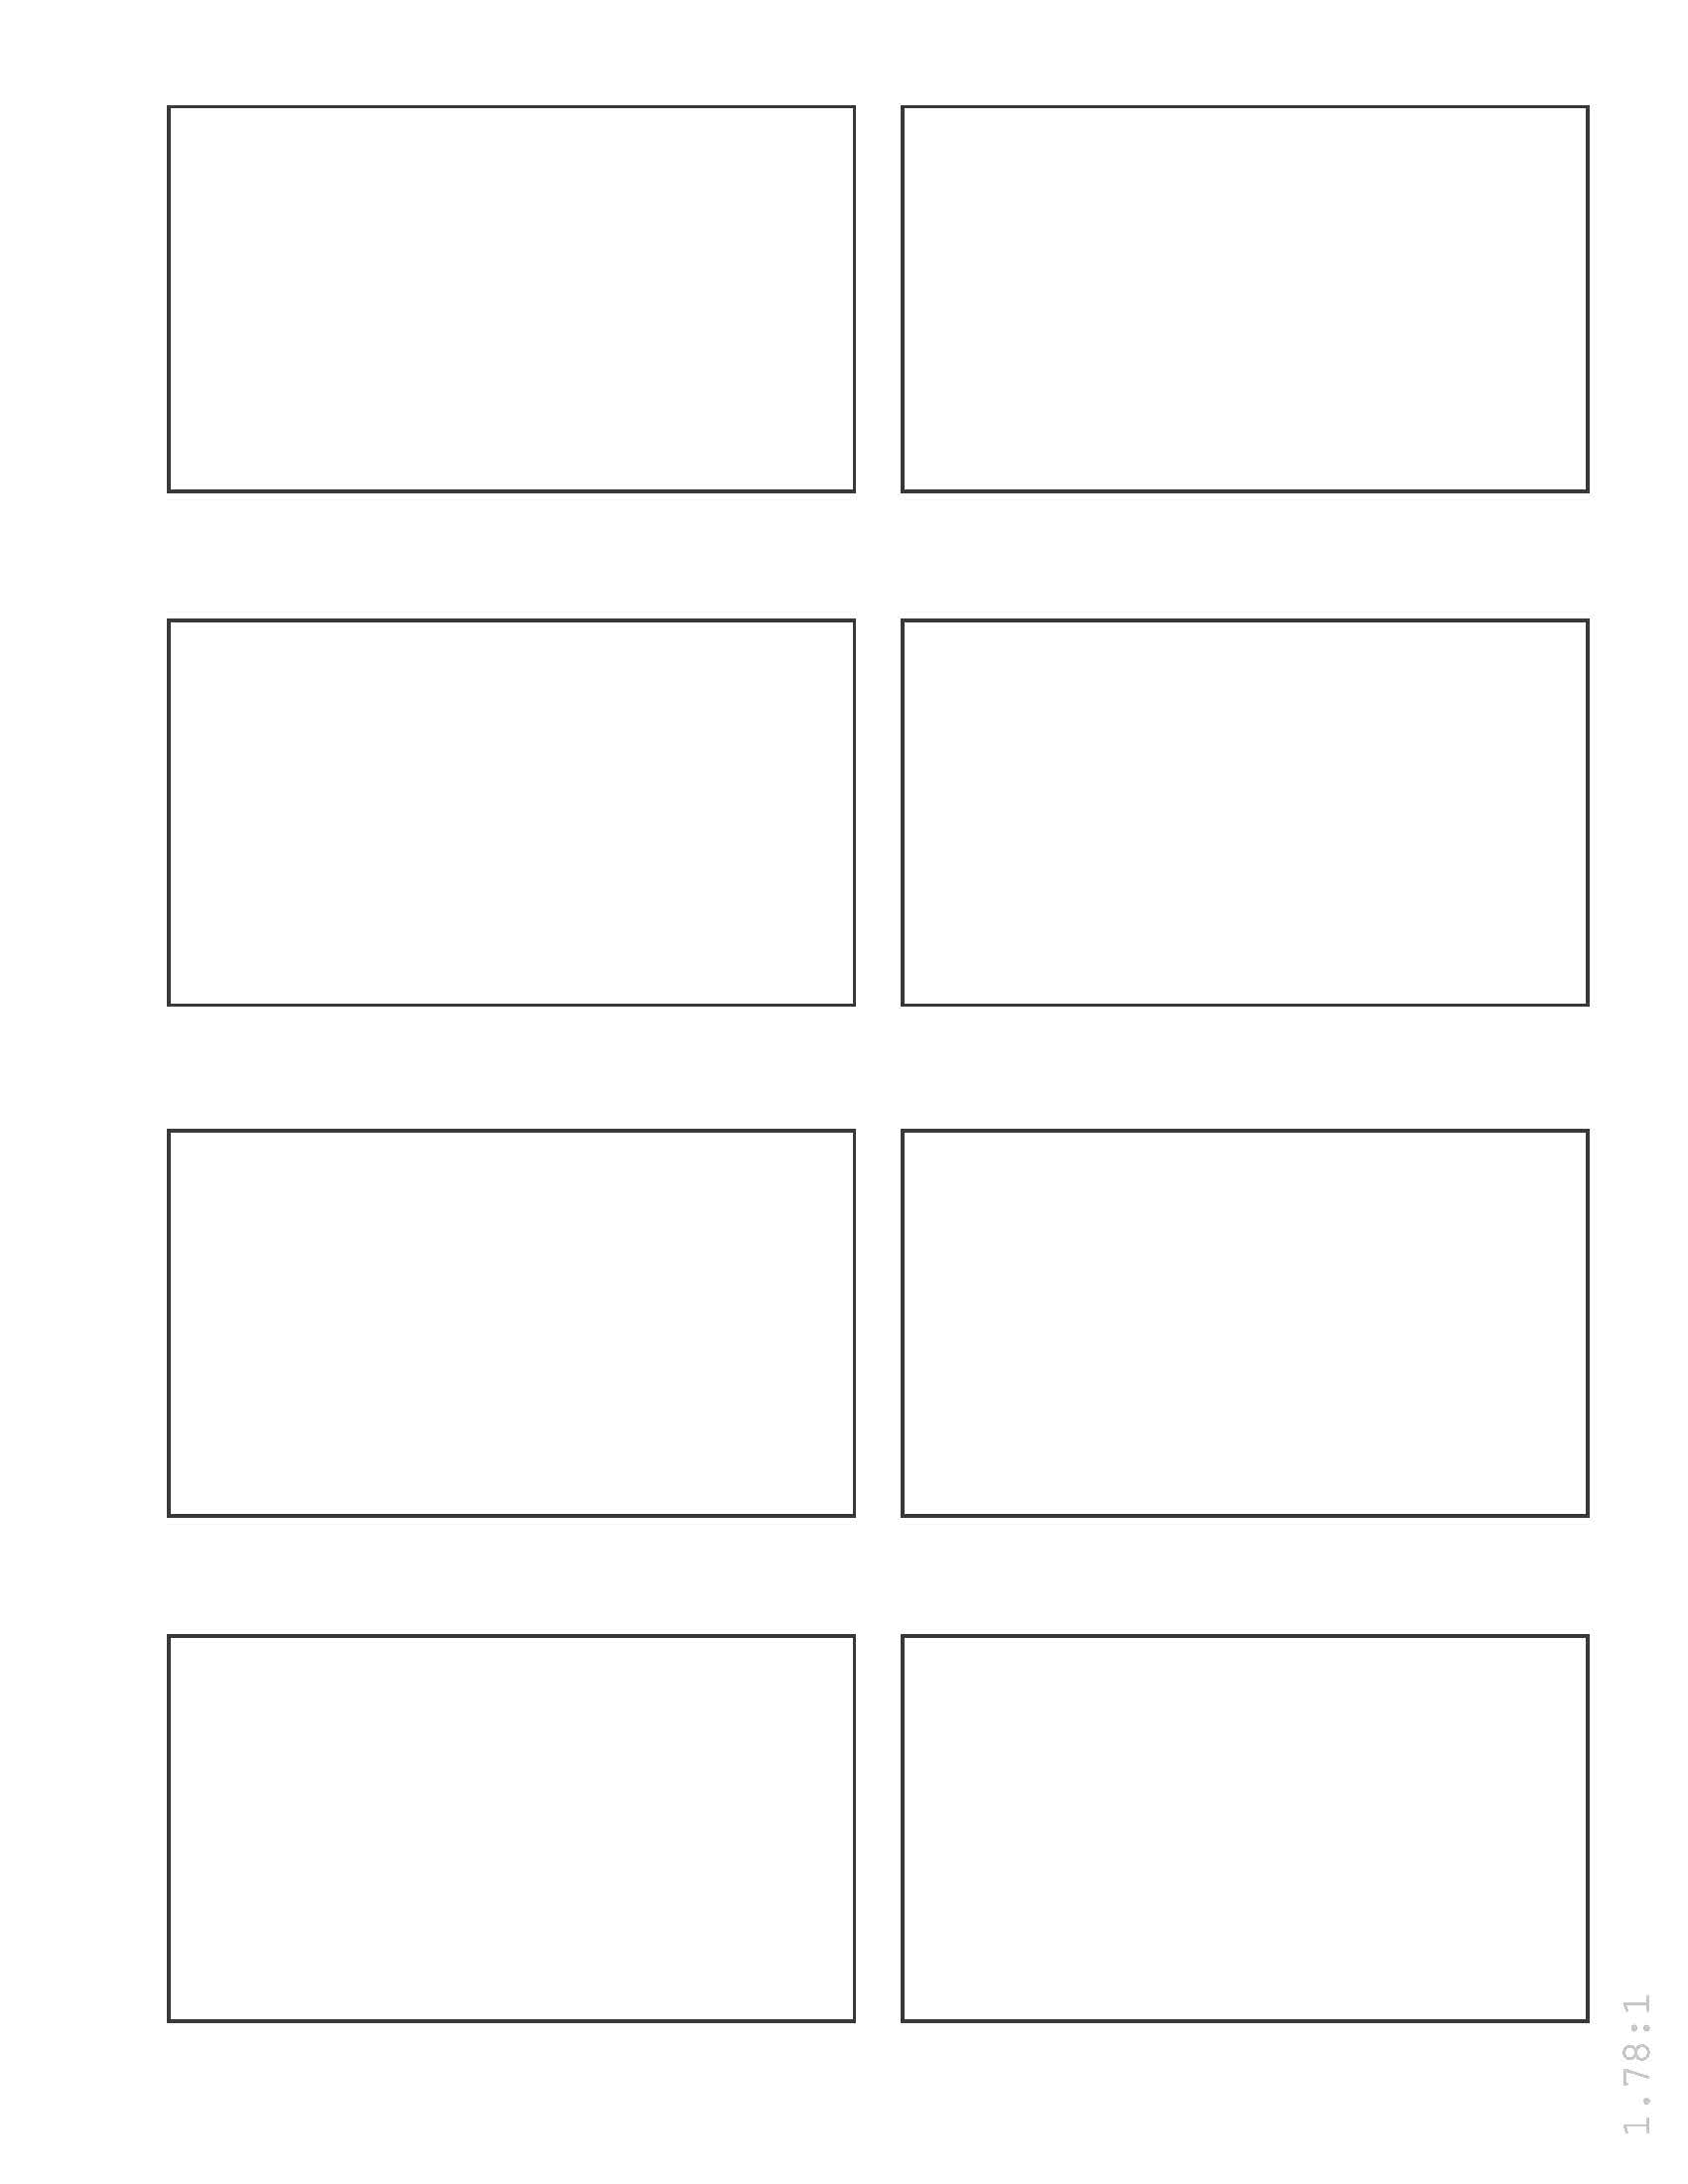 Extended ebook content for Storyboarding Essentials: template for ...